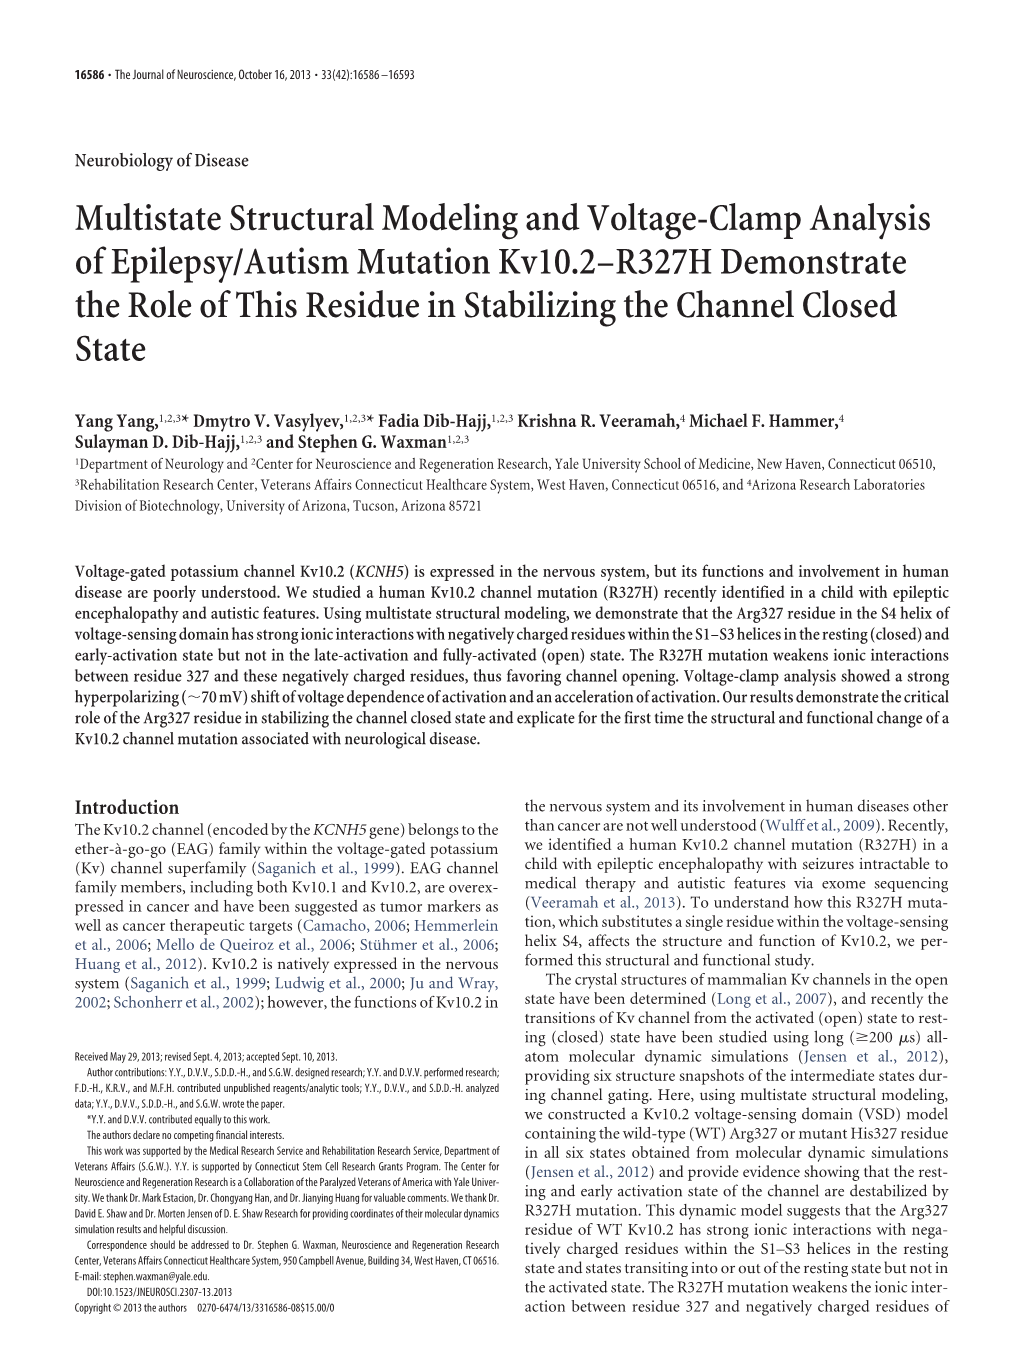 Multistate Structural Modeling and Voltage-Clamp Analysis of Epilepsy/Autism Mutation Kv10.2–R327H Demonstrate the Role Of